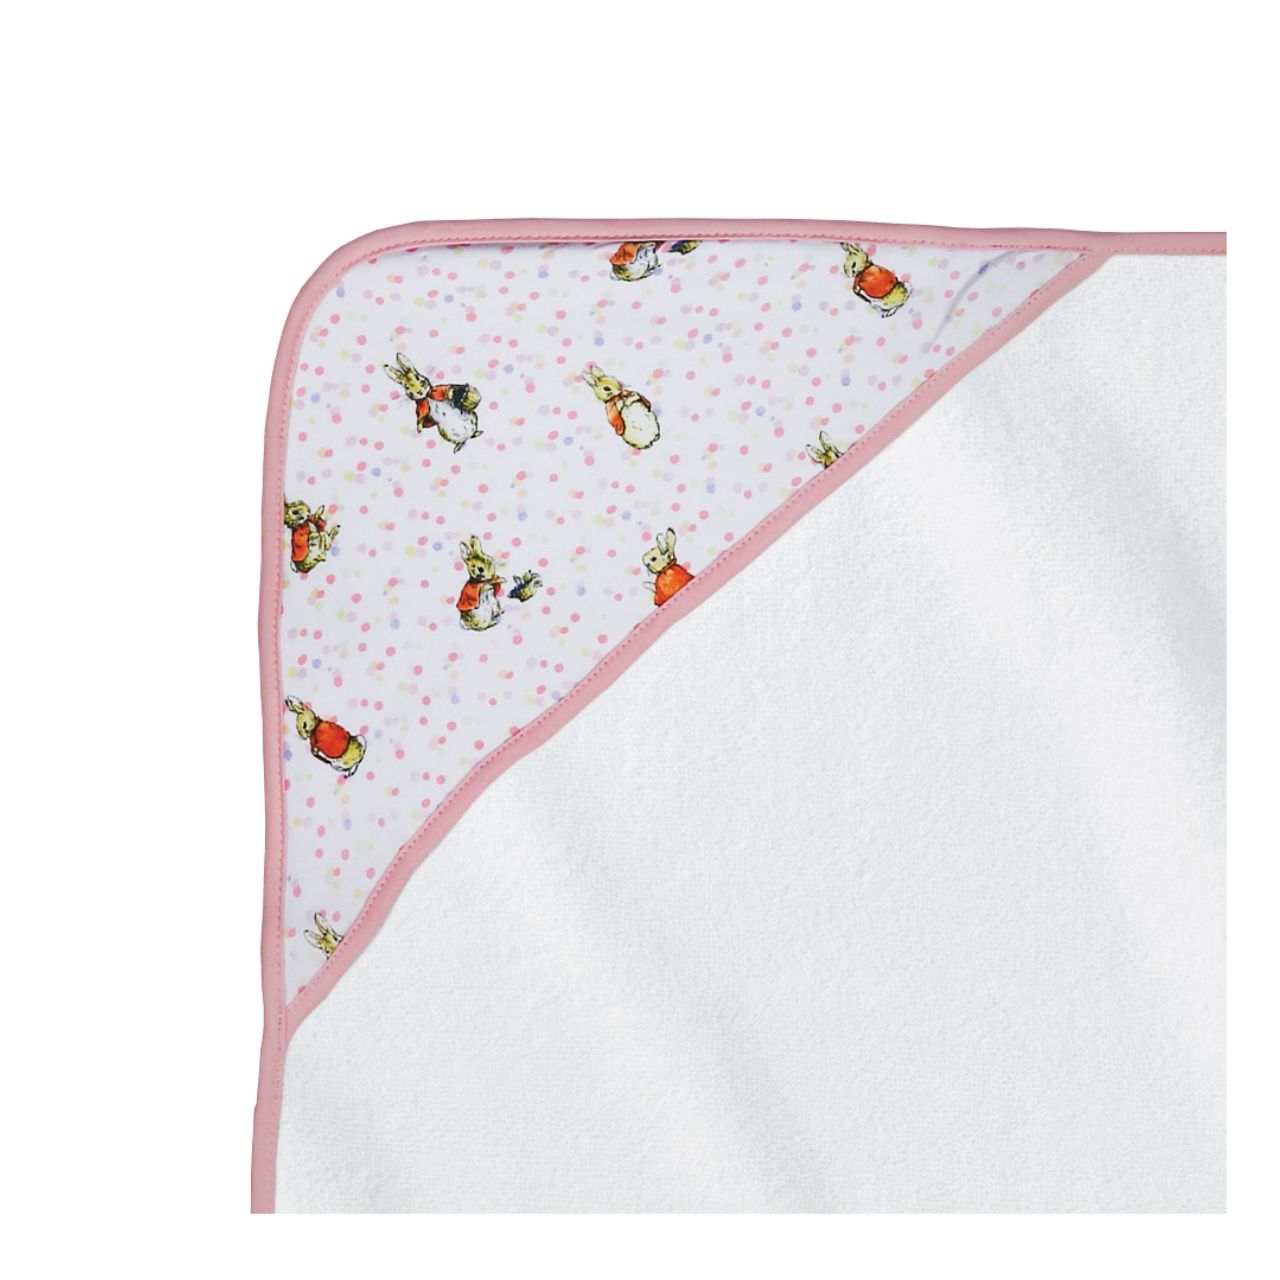 Beatrix Potter Flopsy Baby Collection Hooded Towel  This Flopsy hooded bath towel is perfect for keeping your little one wrapped up warm and snug after bath-time. Made from an ultra-soft and cosy bamboo cotton, terry fabric (70% cotton and 30% bamboo) and Flopsy artwork on the hood.